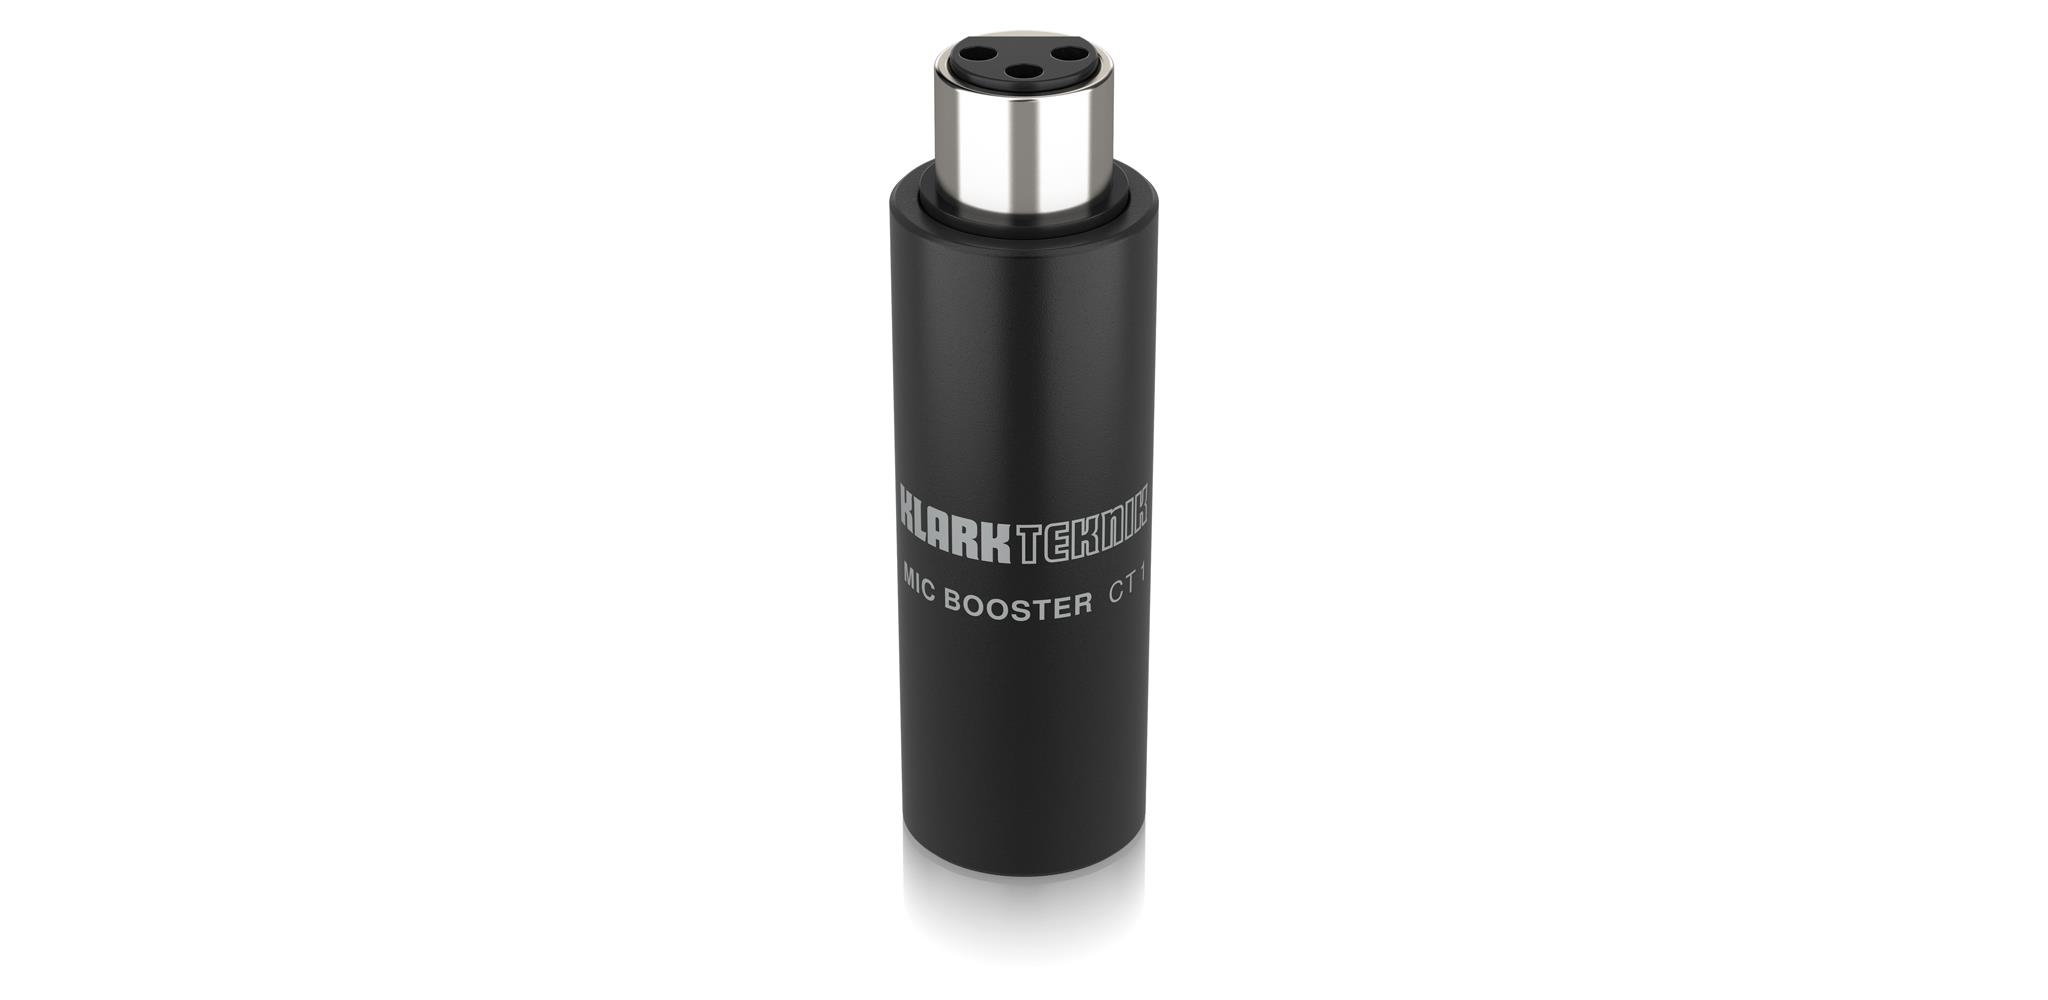 MIC BOOSTER CT 1